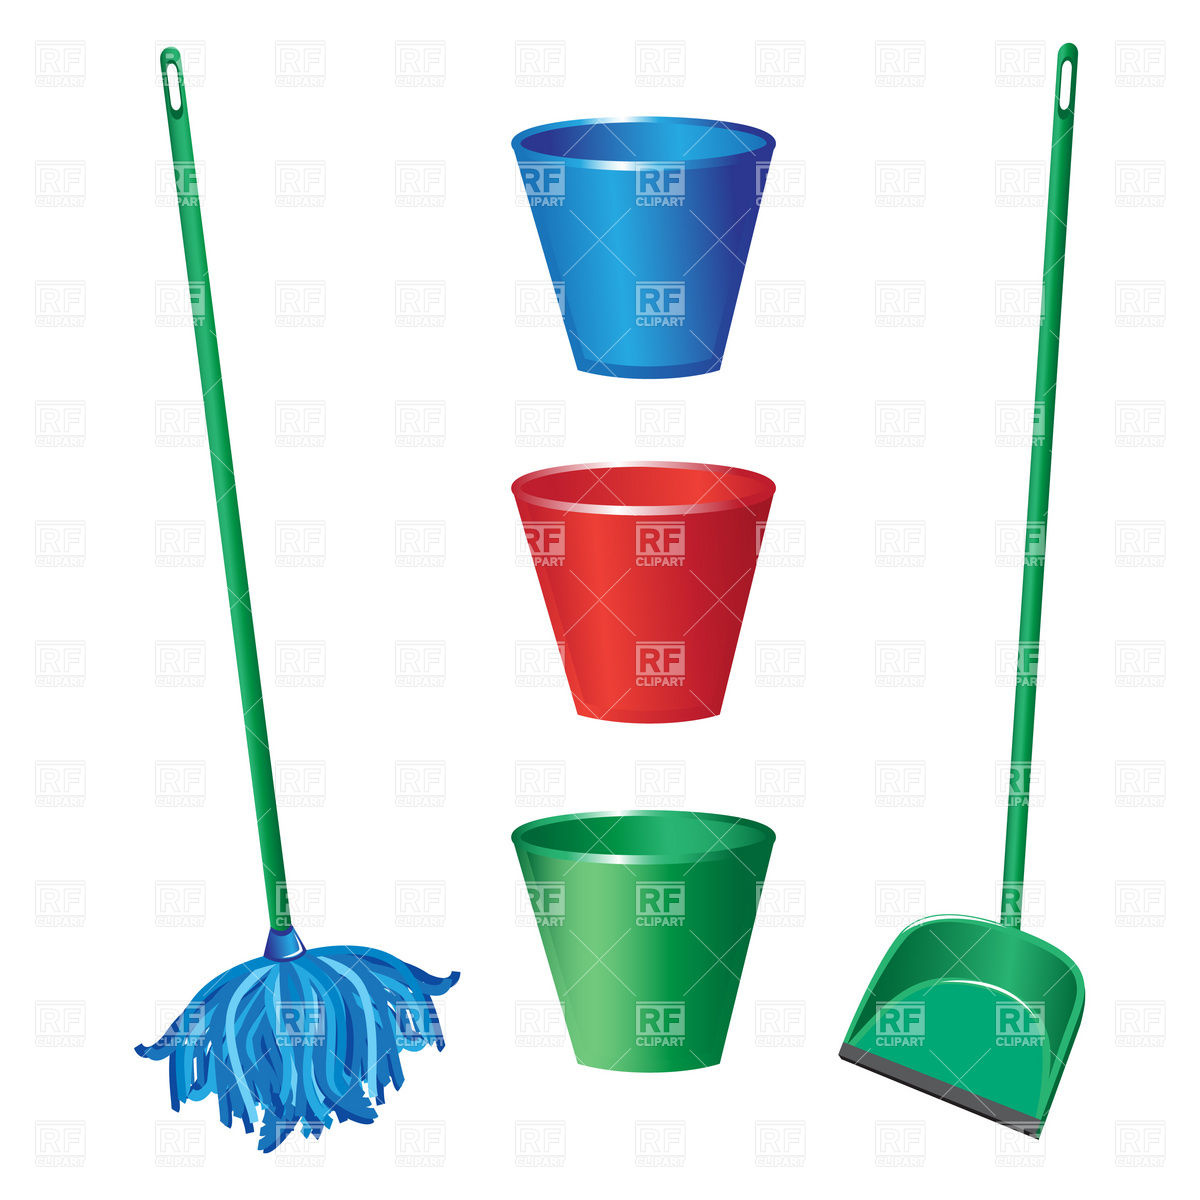 Floor Cleaning Tools   Swab Dustpan And Plastic Bucket 8318 Objects    